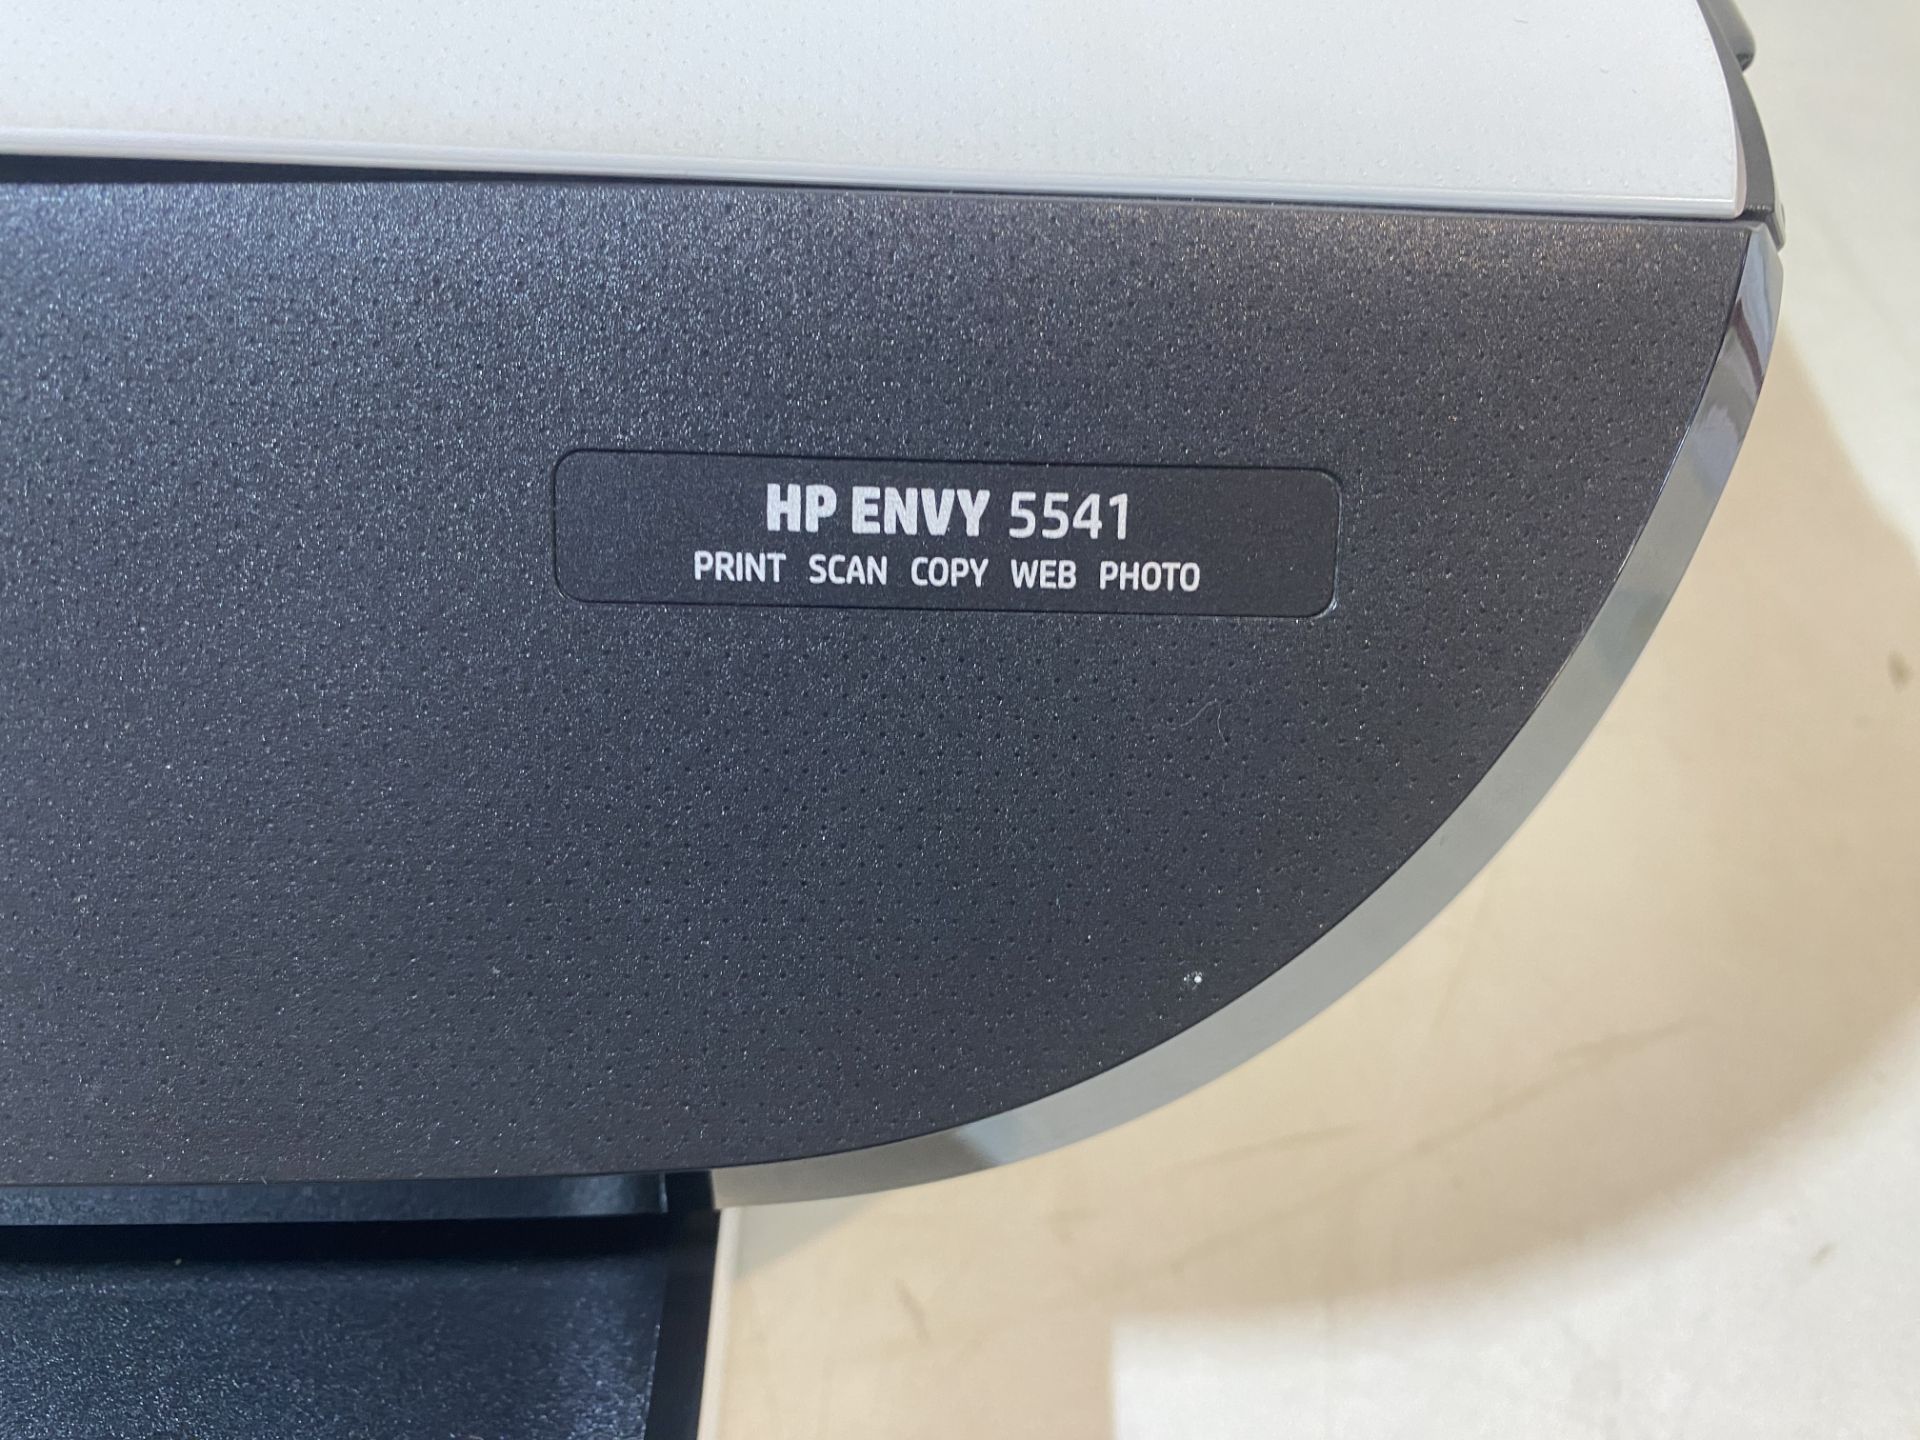 HP Envy 5541 All-in-One Printer - Image 2 of 12